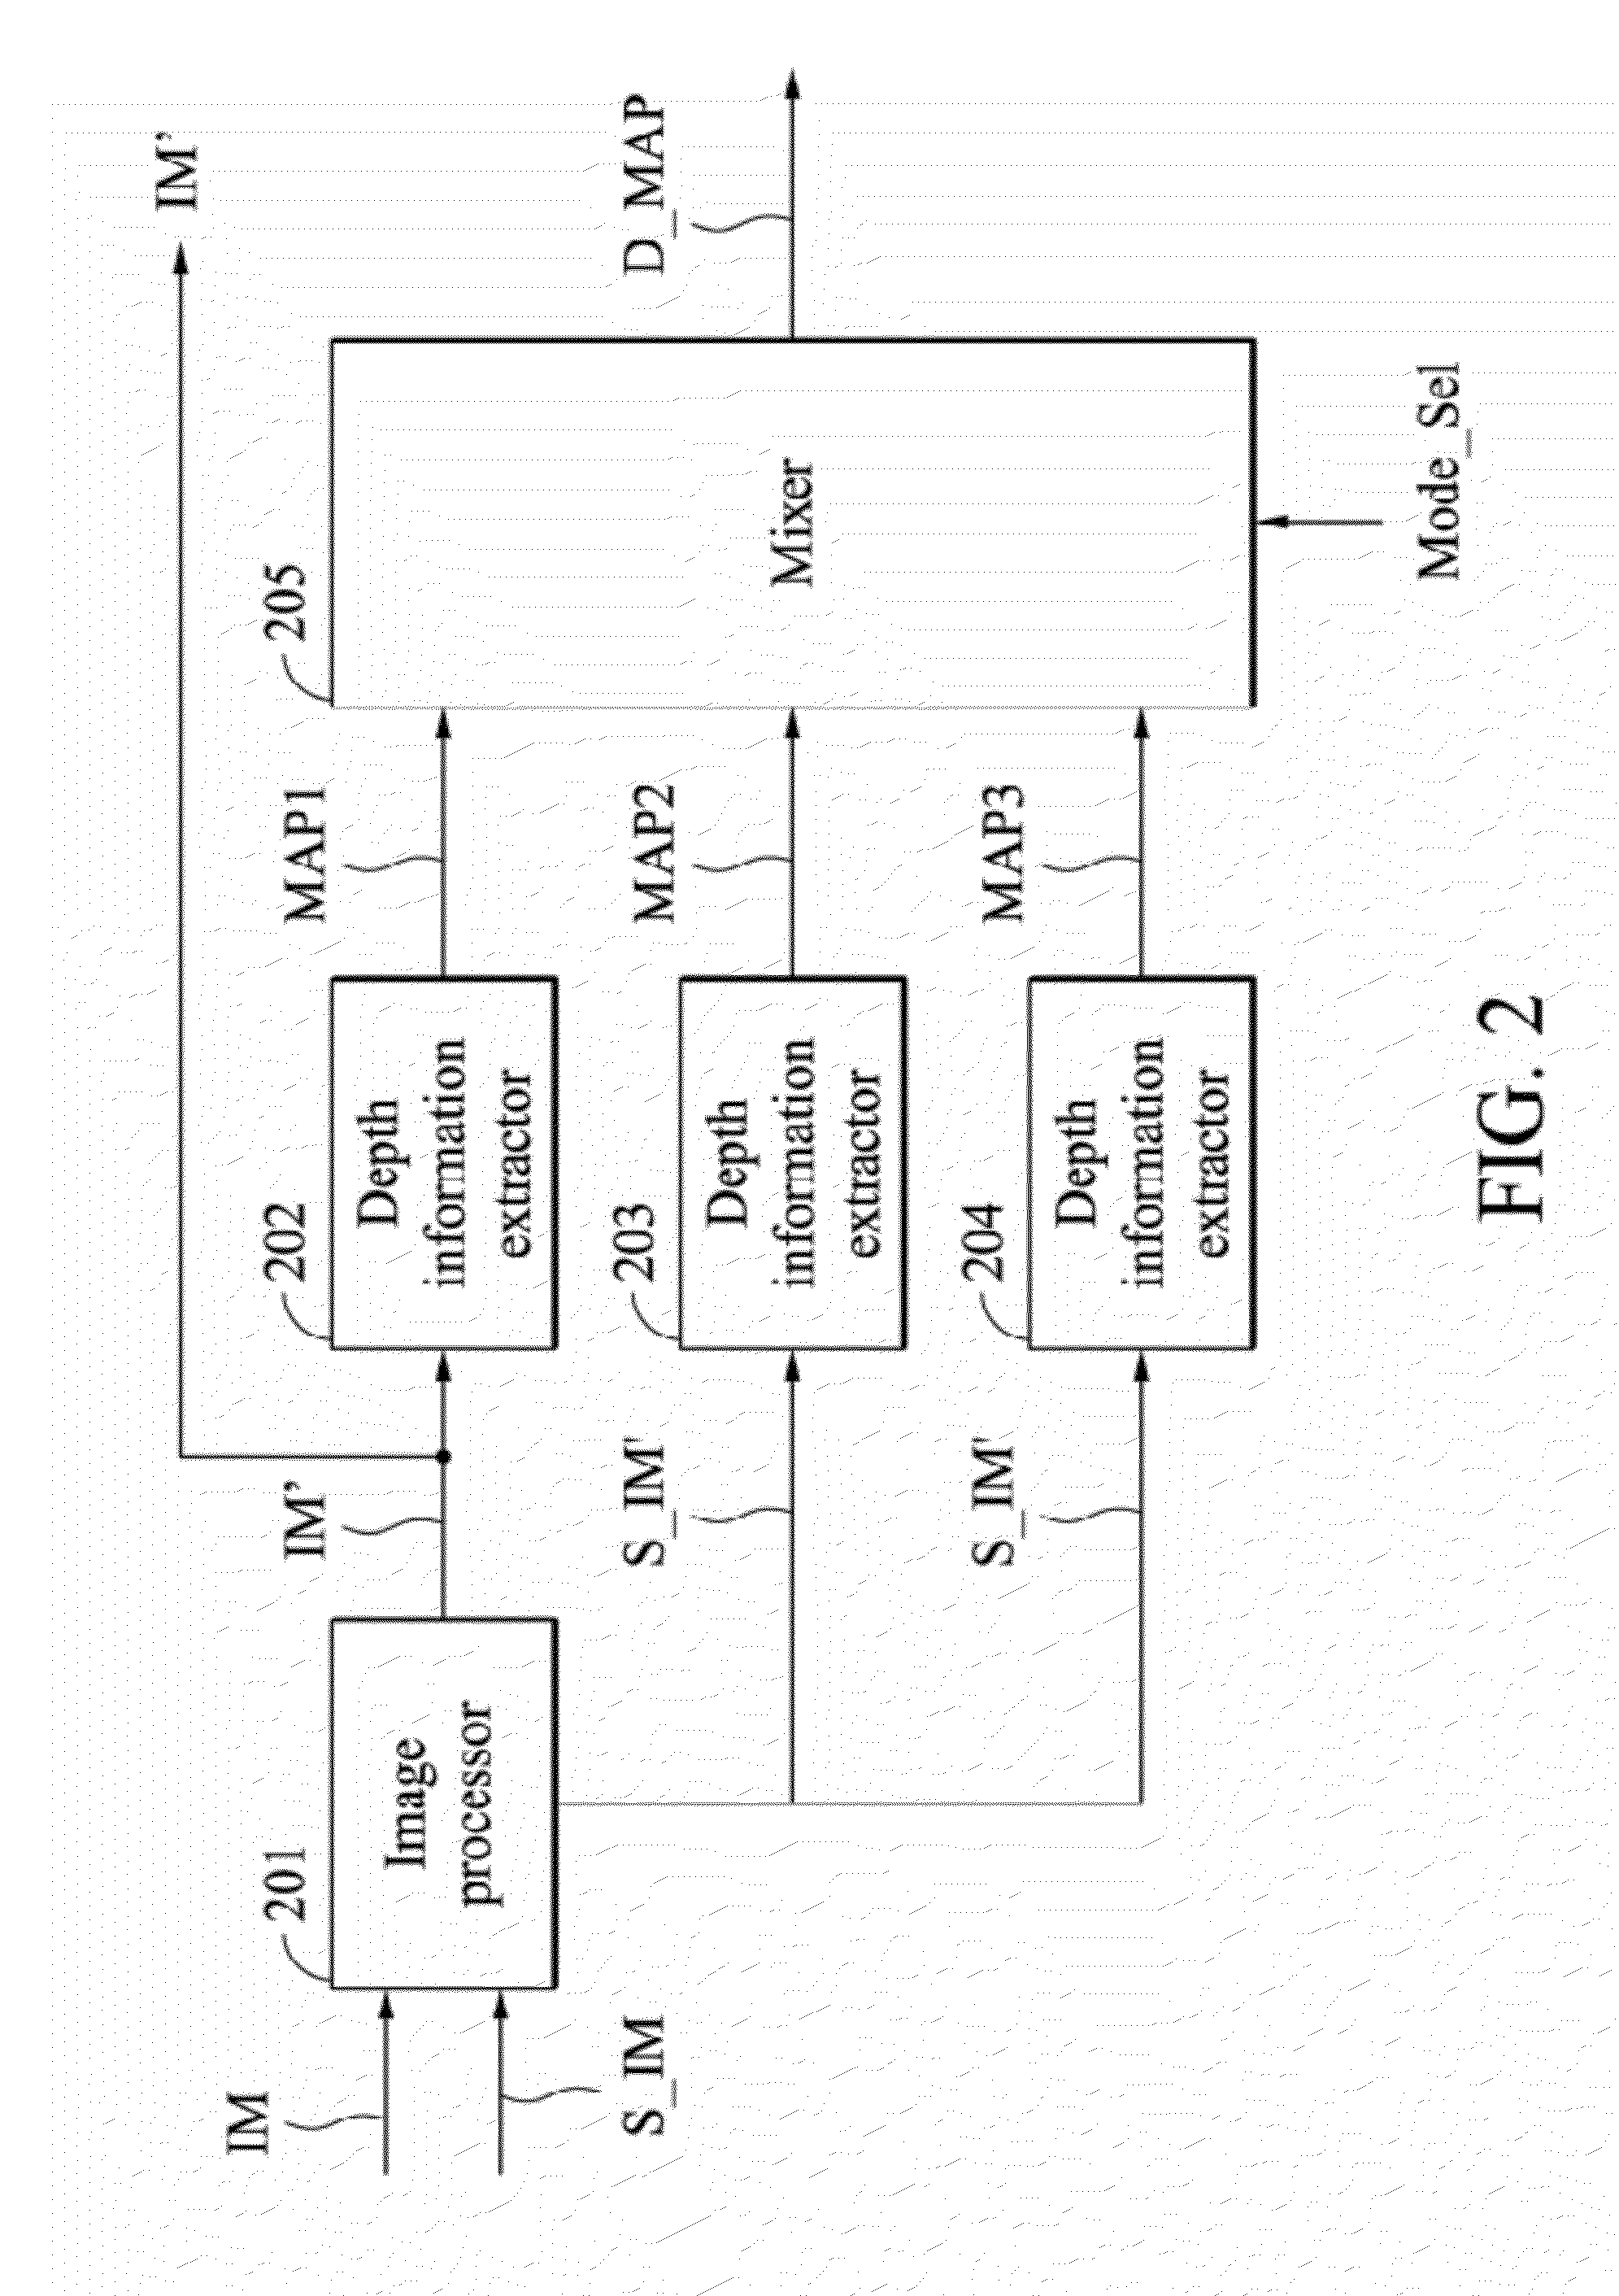 Stereoscopic Image Generating Apparatus and Method